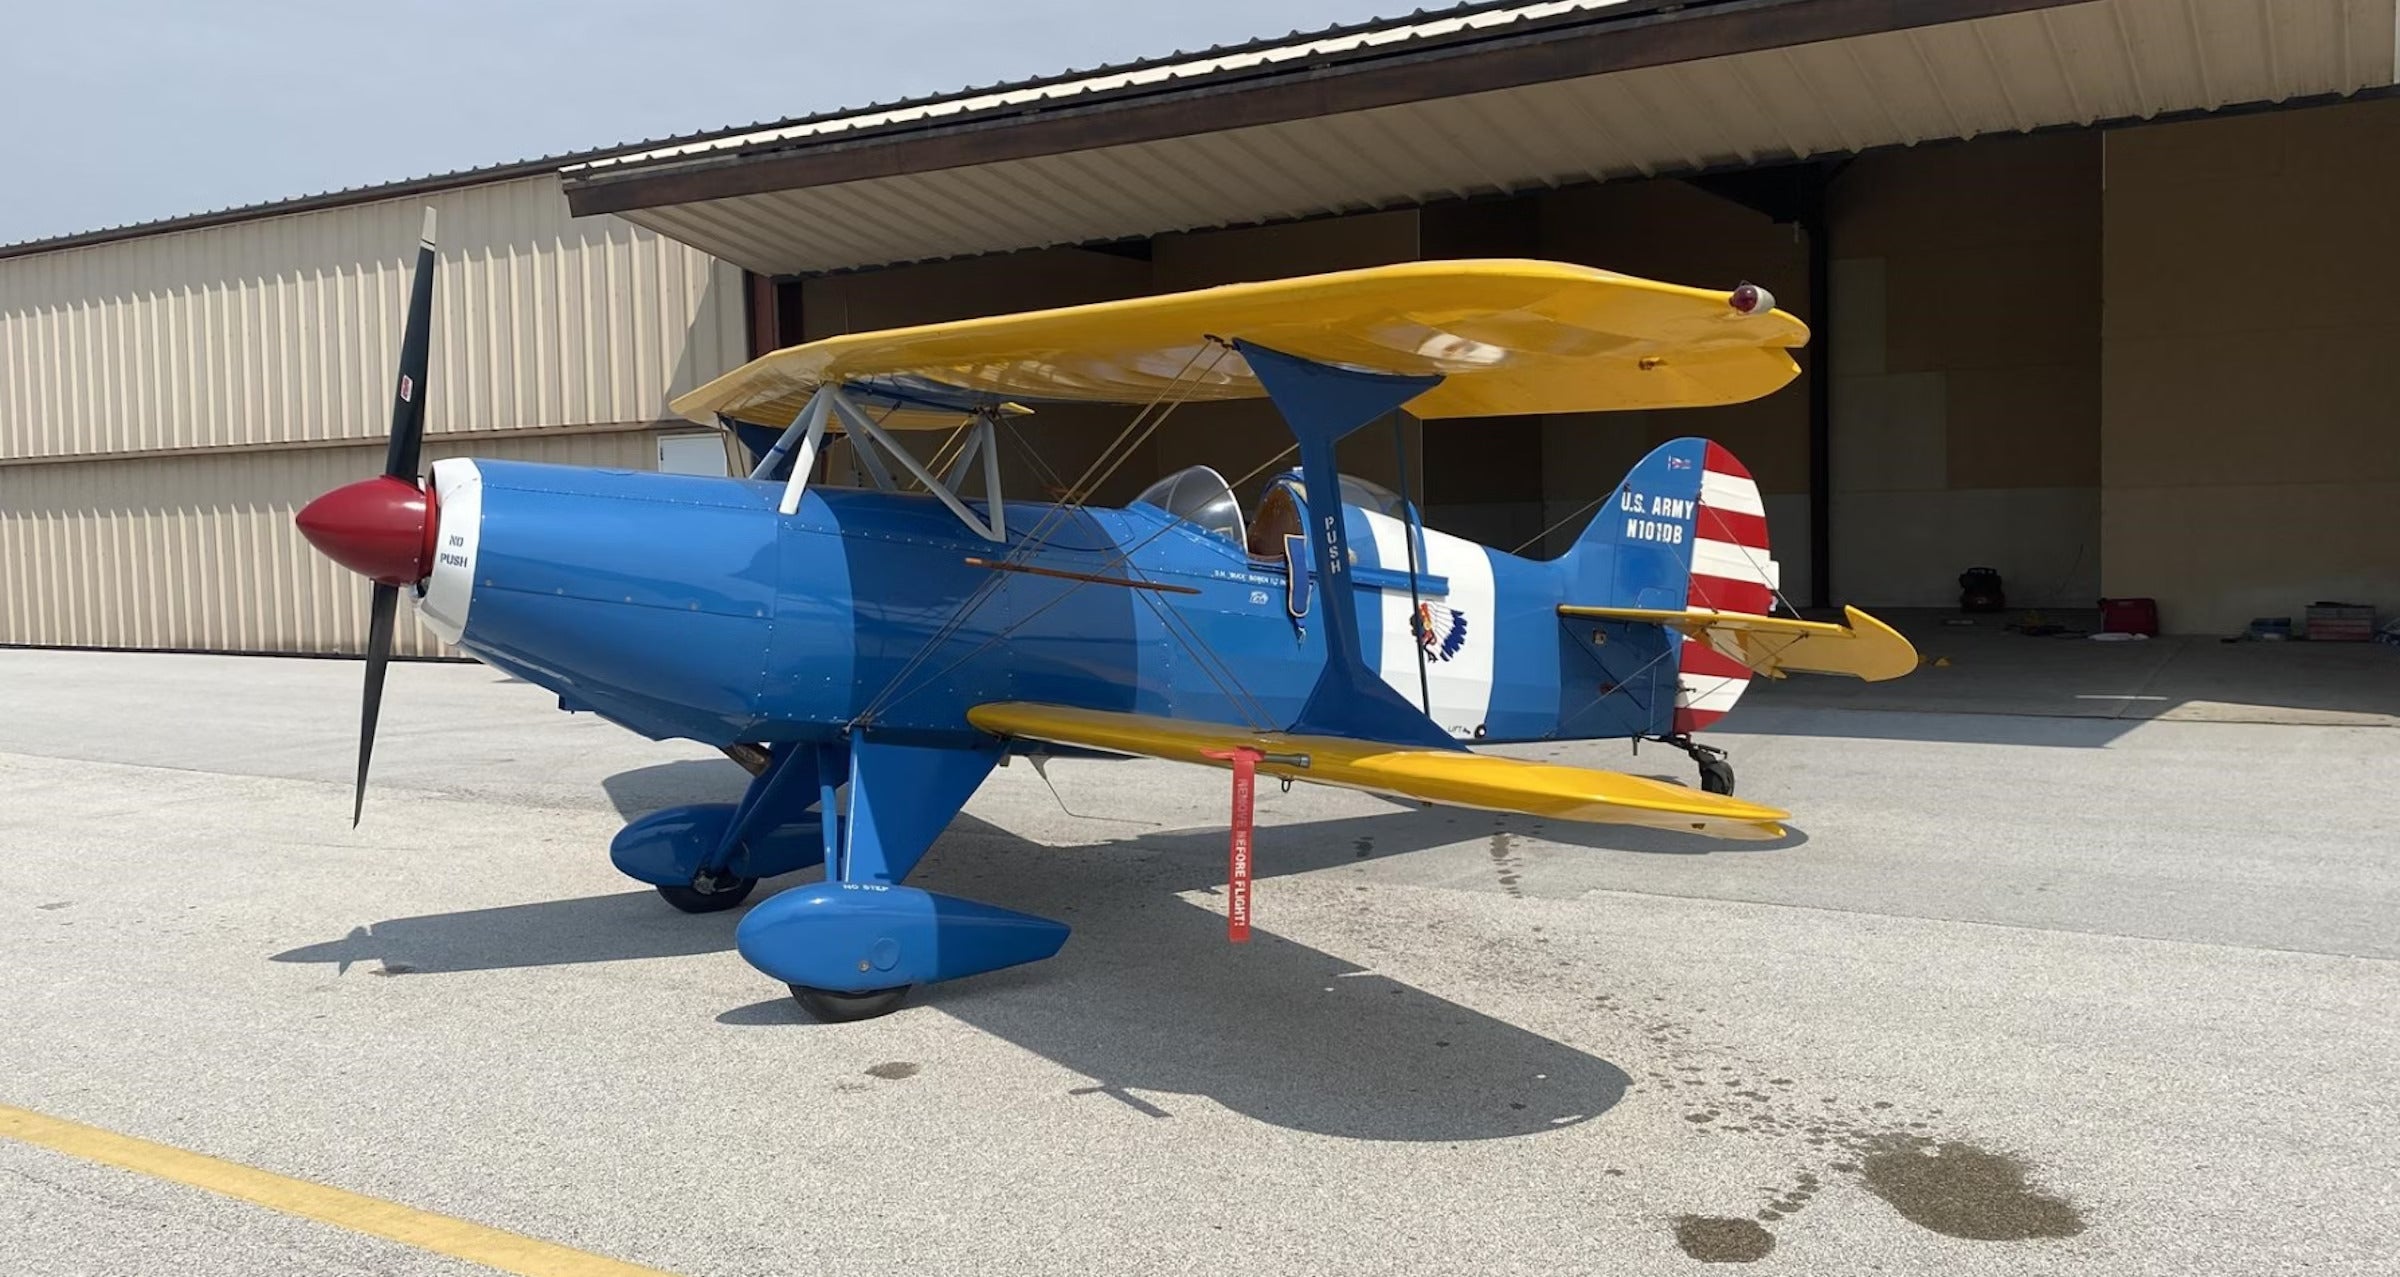 This 1994 Steen Skybolt’s Biplane Proportions Make It an ‘AircraftForSale’ Top Pick